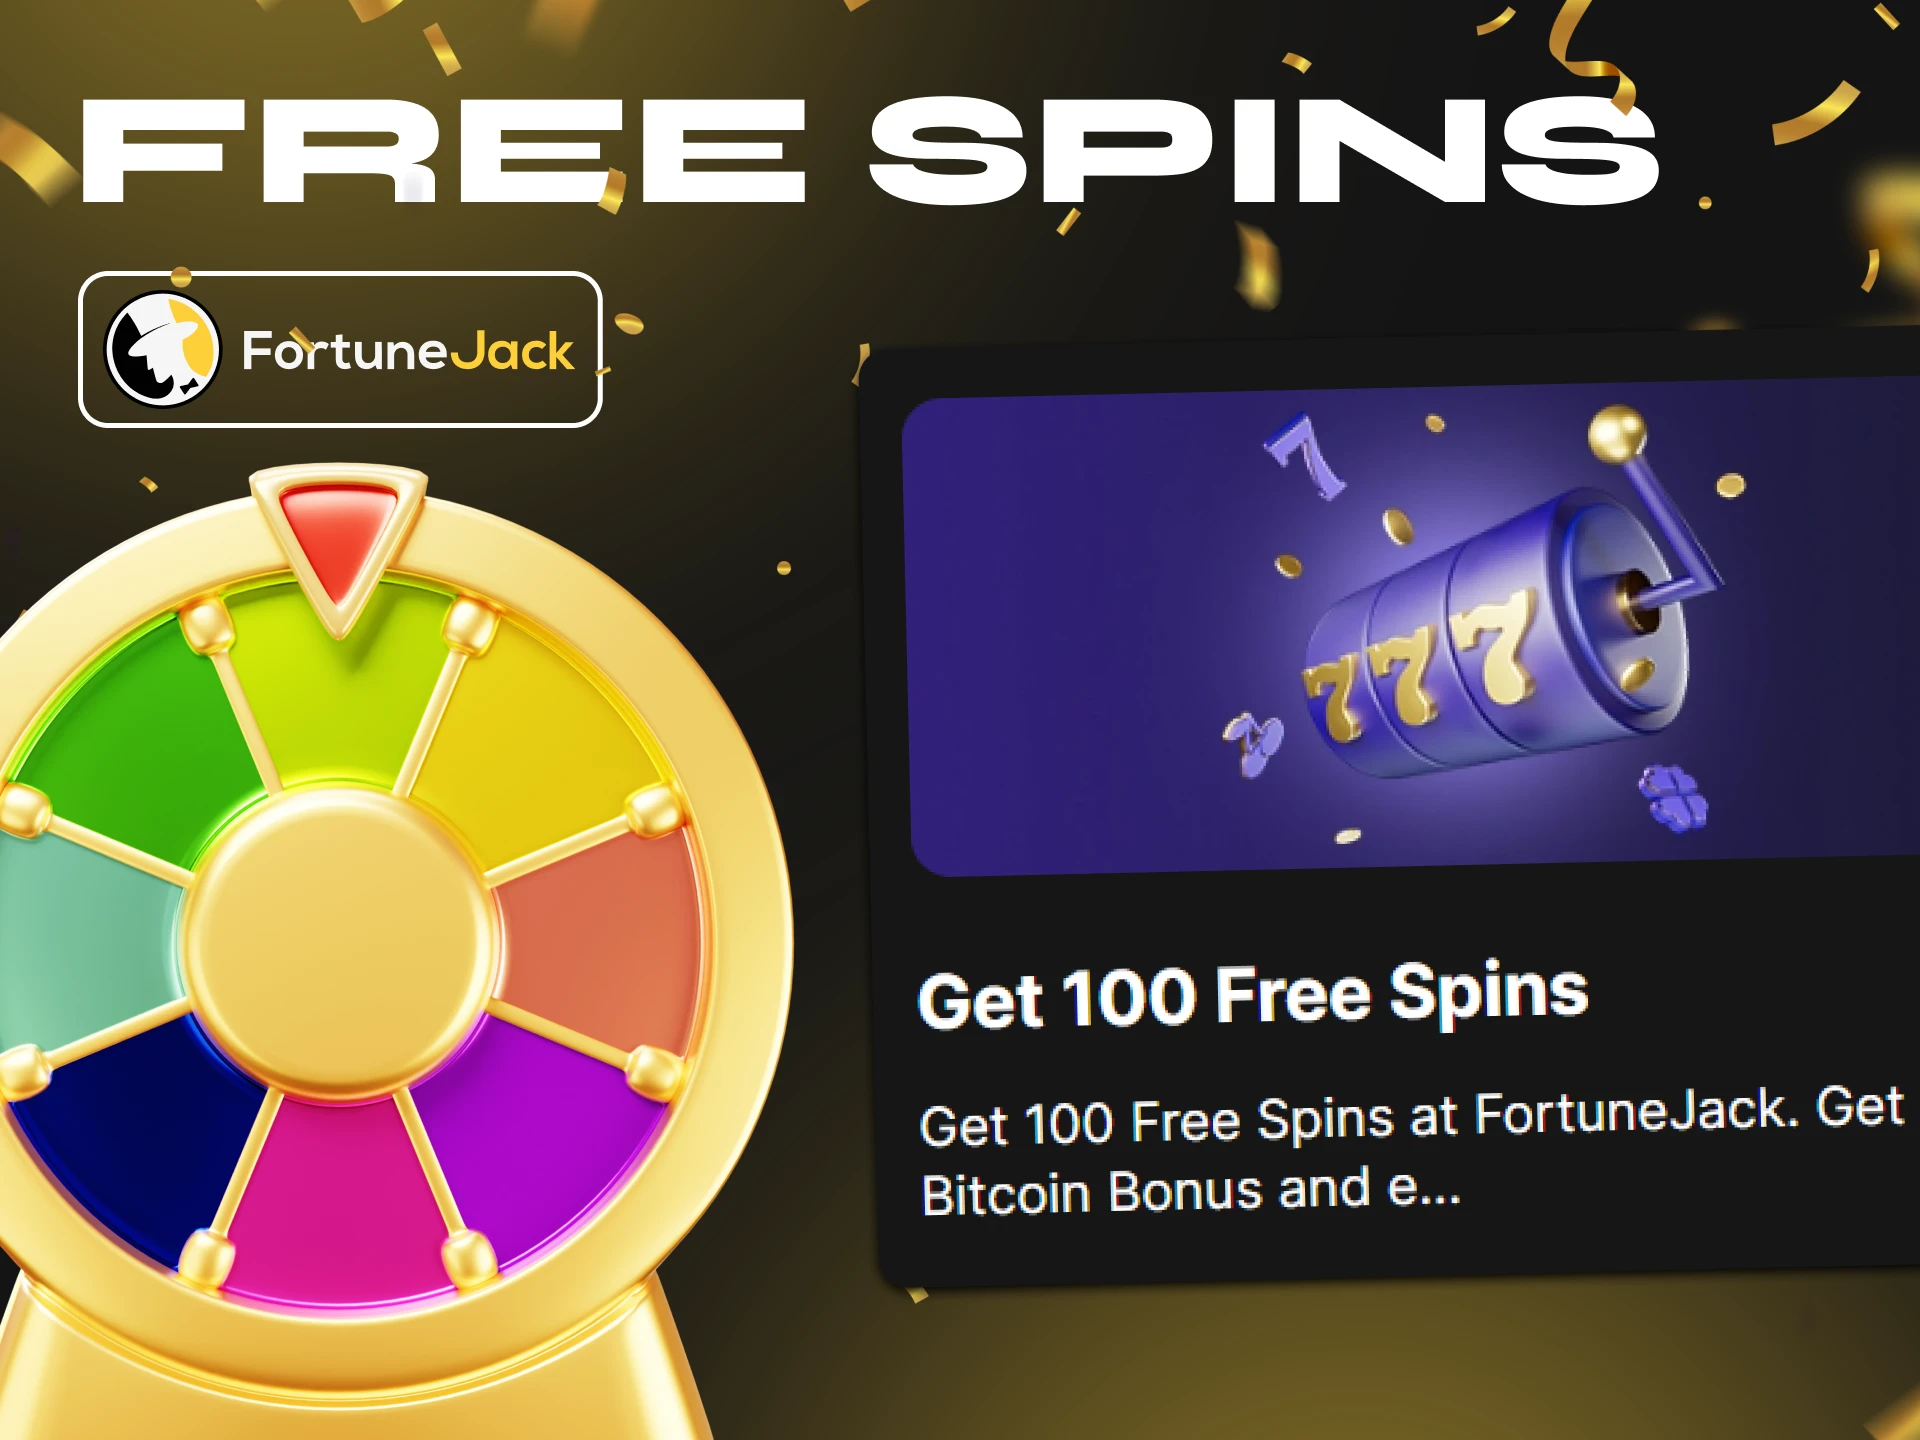 Register at FortuneJack Casino and get free spins.